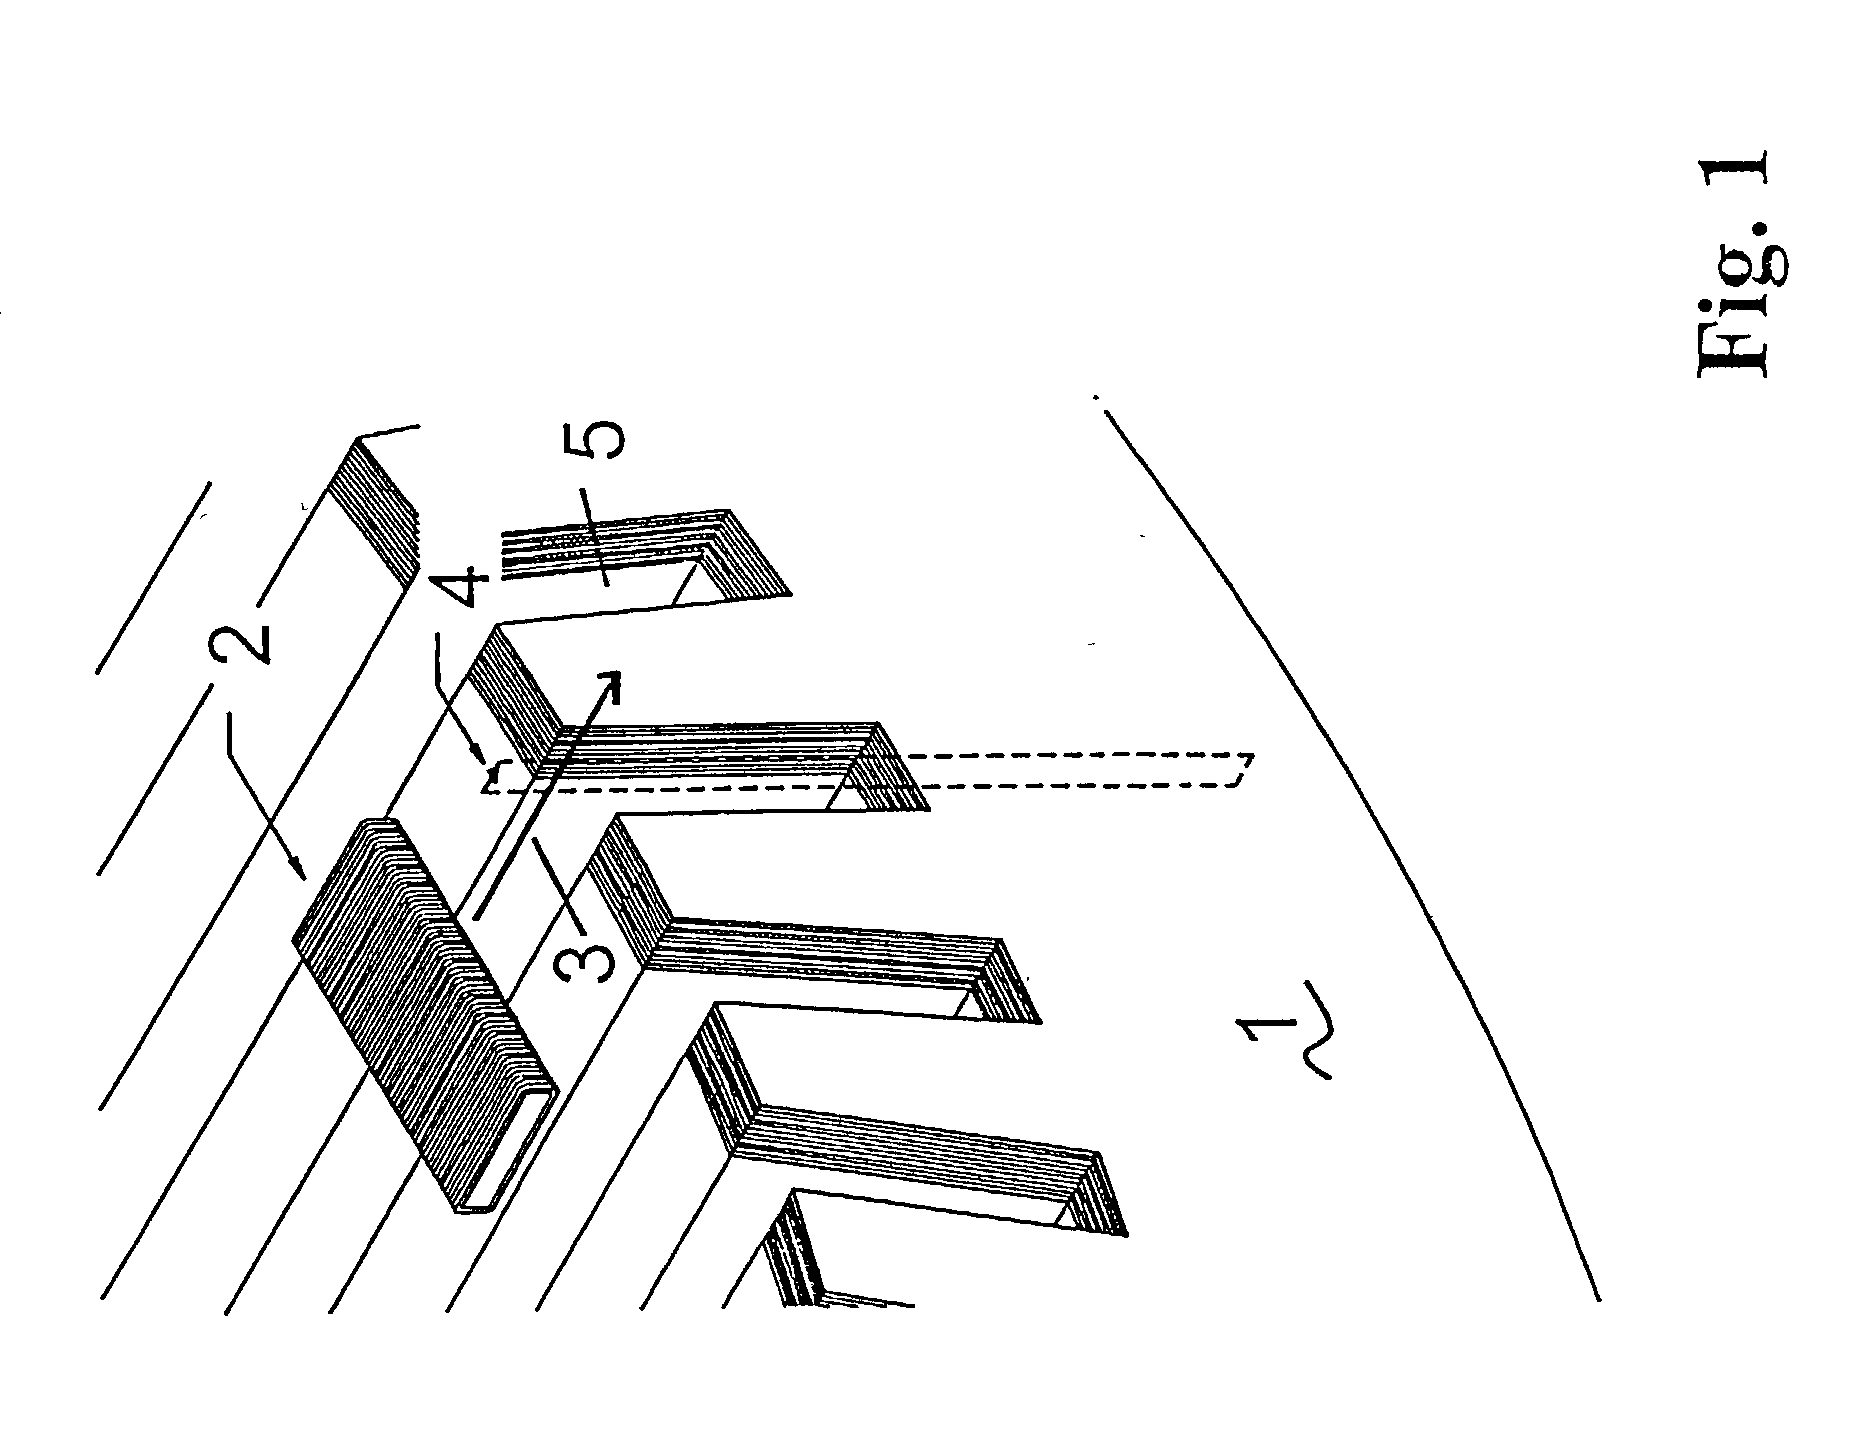 Method and device for inspecting laminated iron cores of electrical machines for interlamination shorts